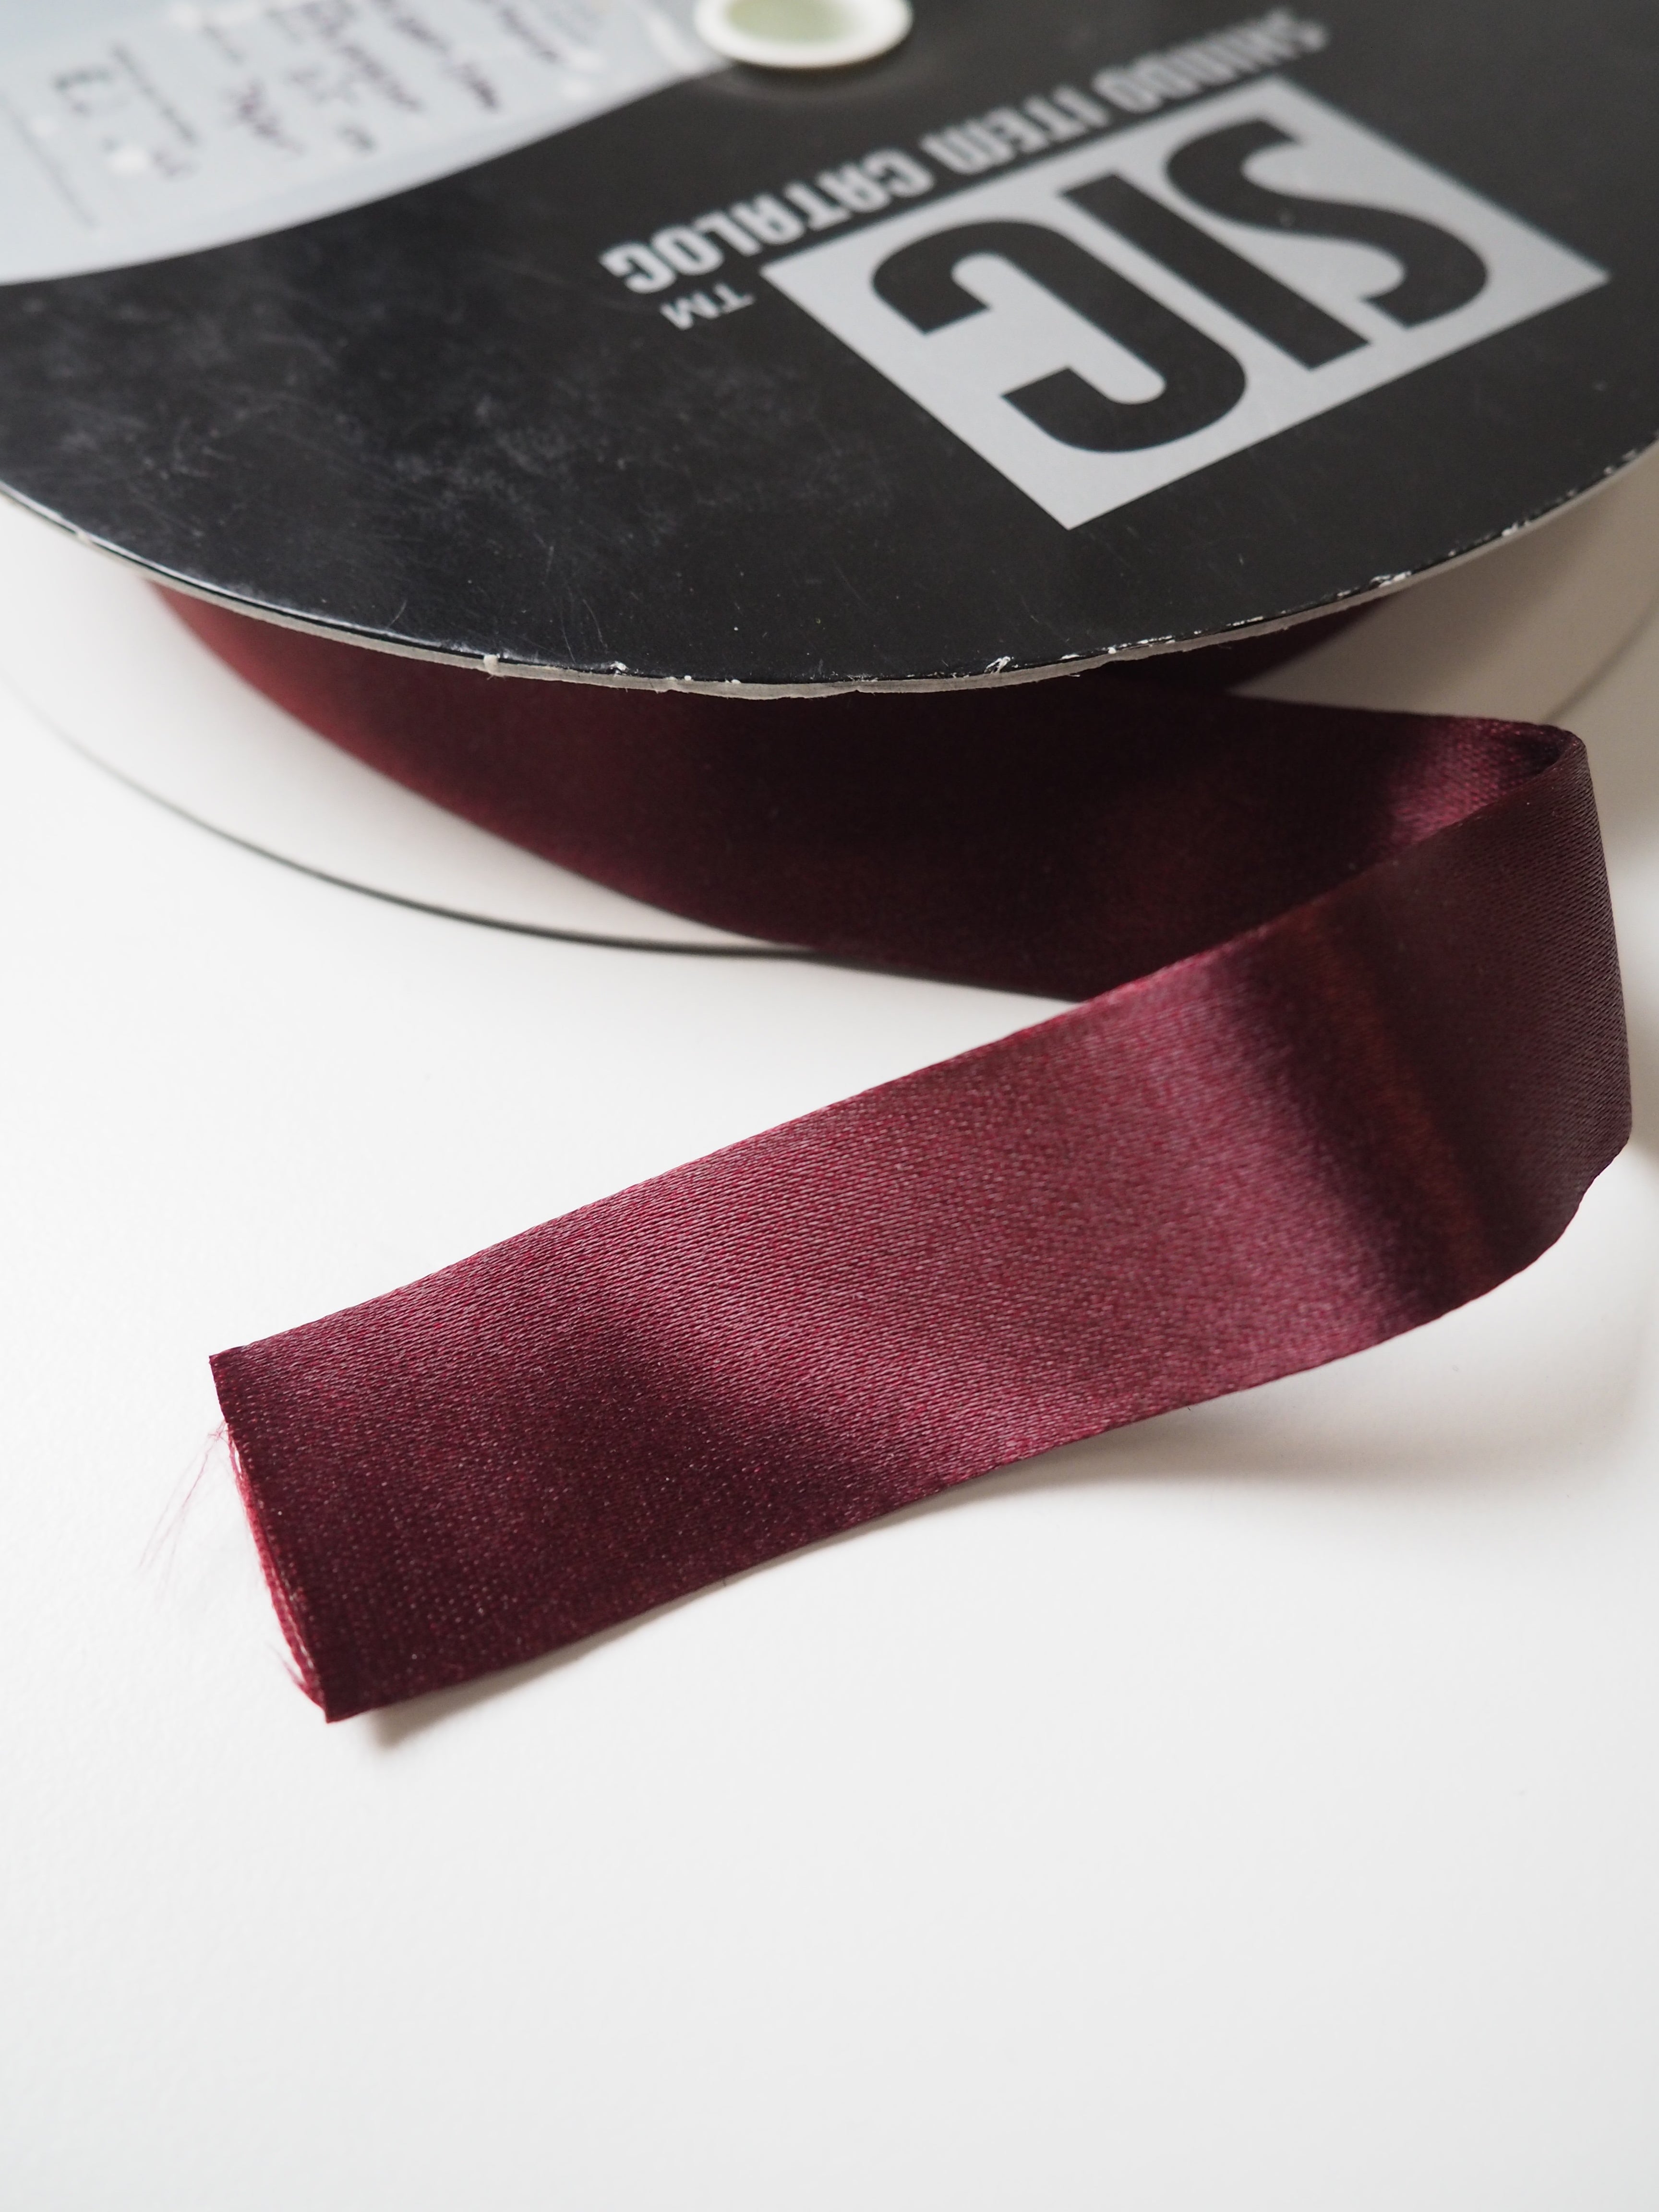 Shindo Double Satin Ribbon In All Shades & Widths